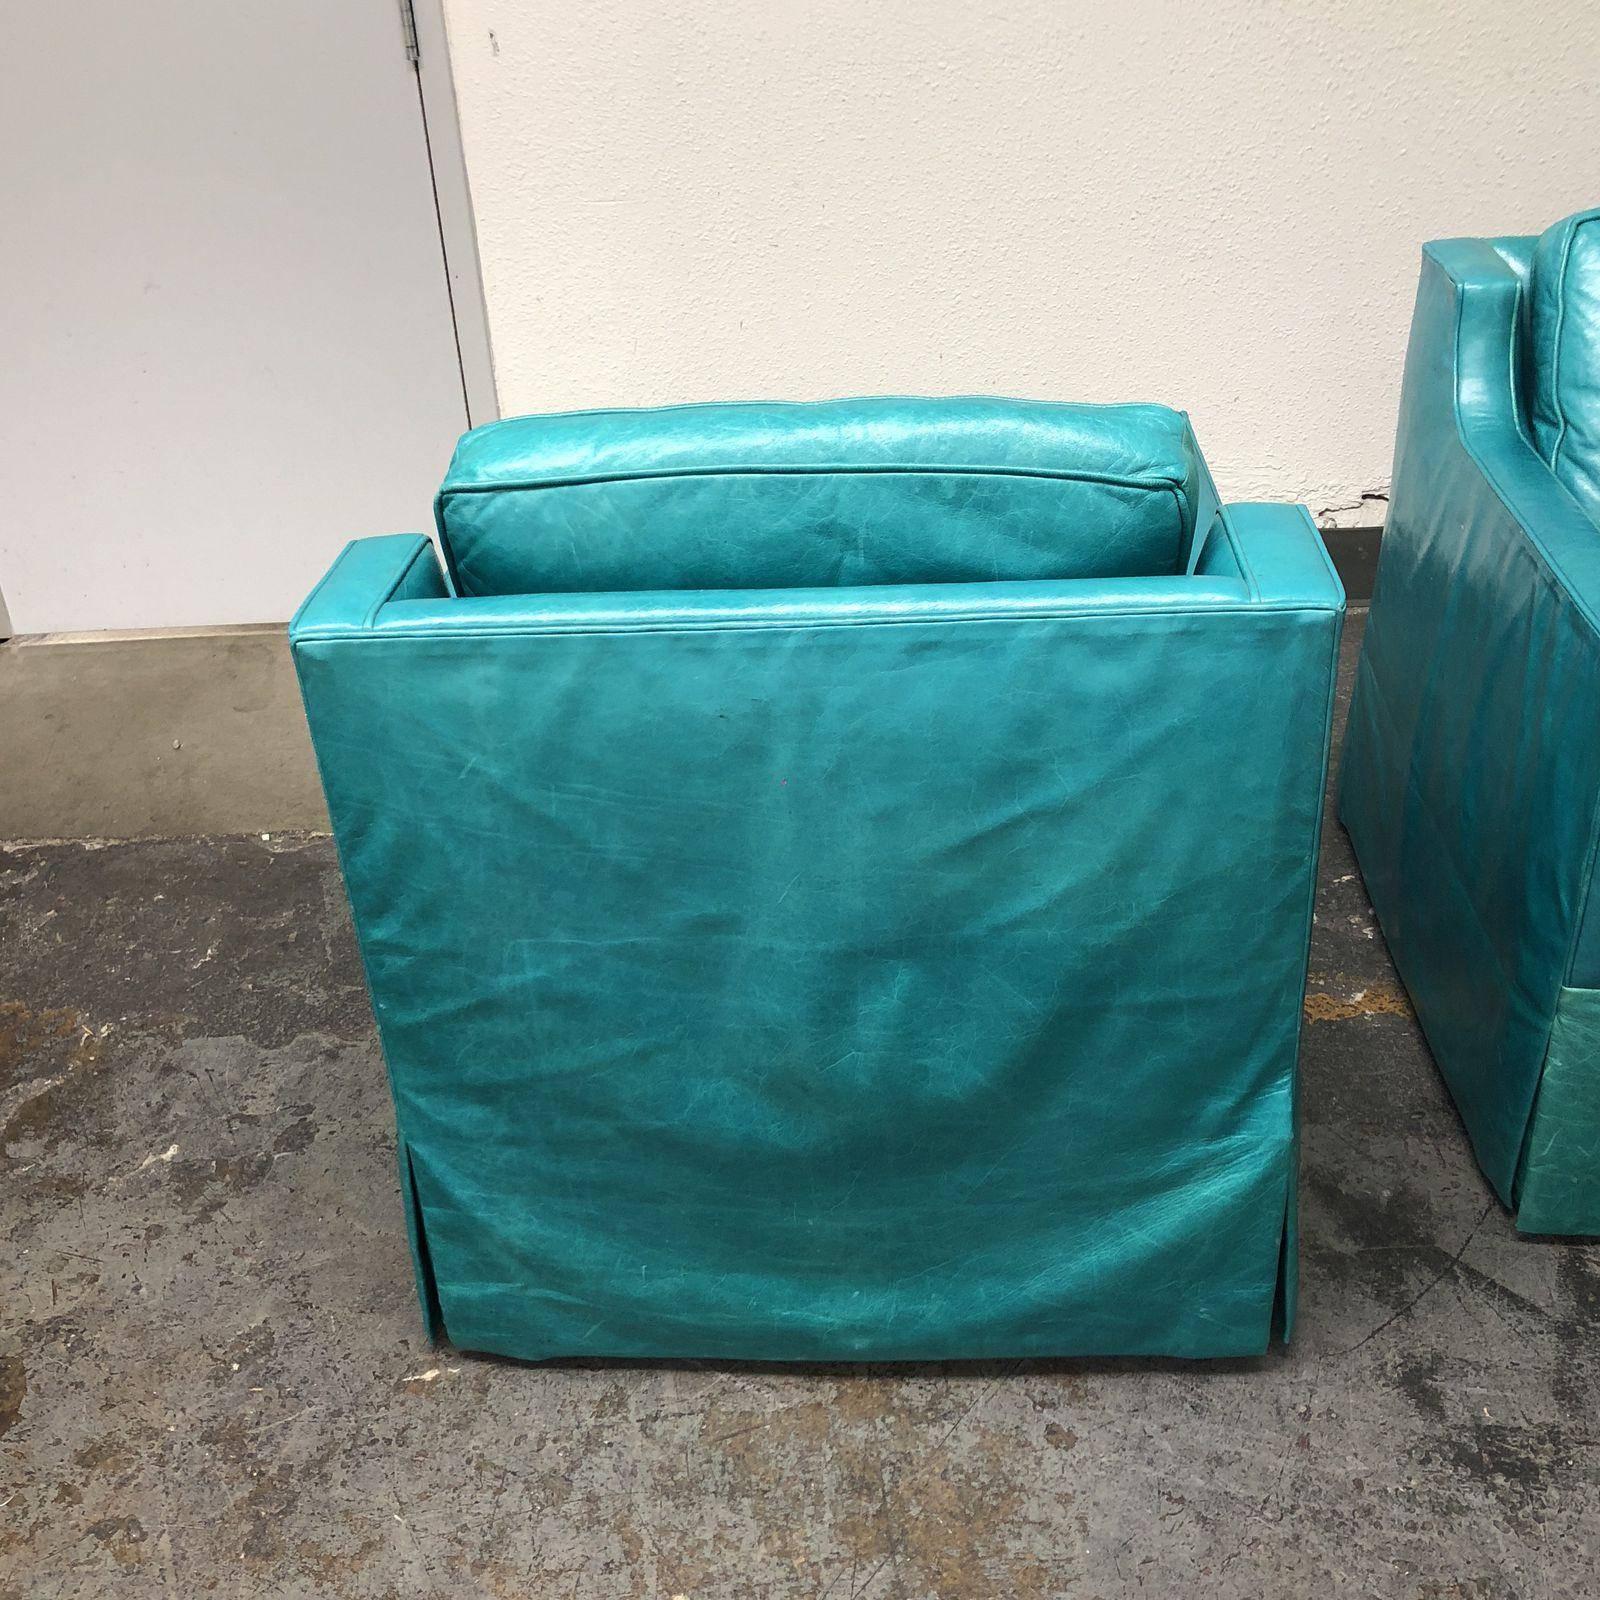 A pair of custom swivel leather arm chairs. Upholstered in a beautiful turquoise leather. The frame has slope arms with a leather skirt. The seat and back cushion are removable. The leather shows natural distress which creates a classic and